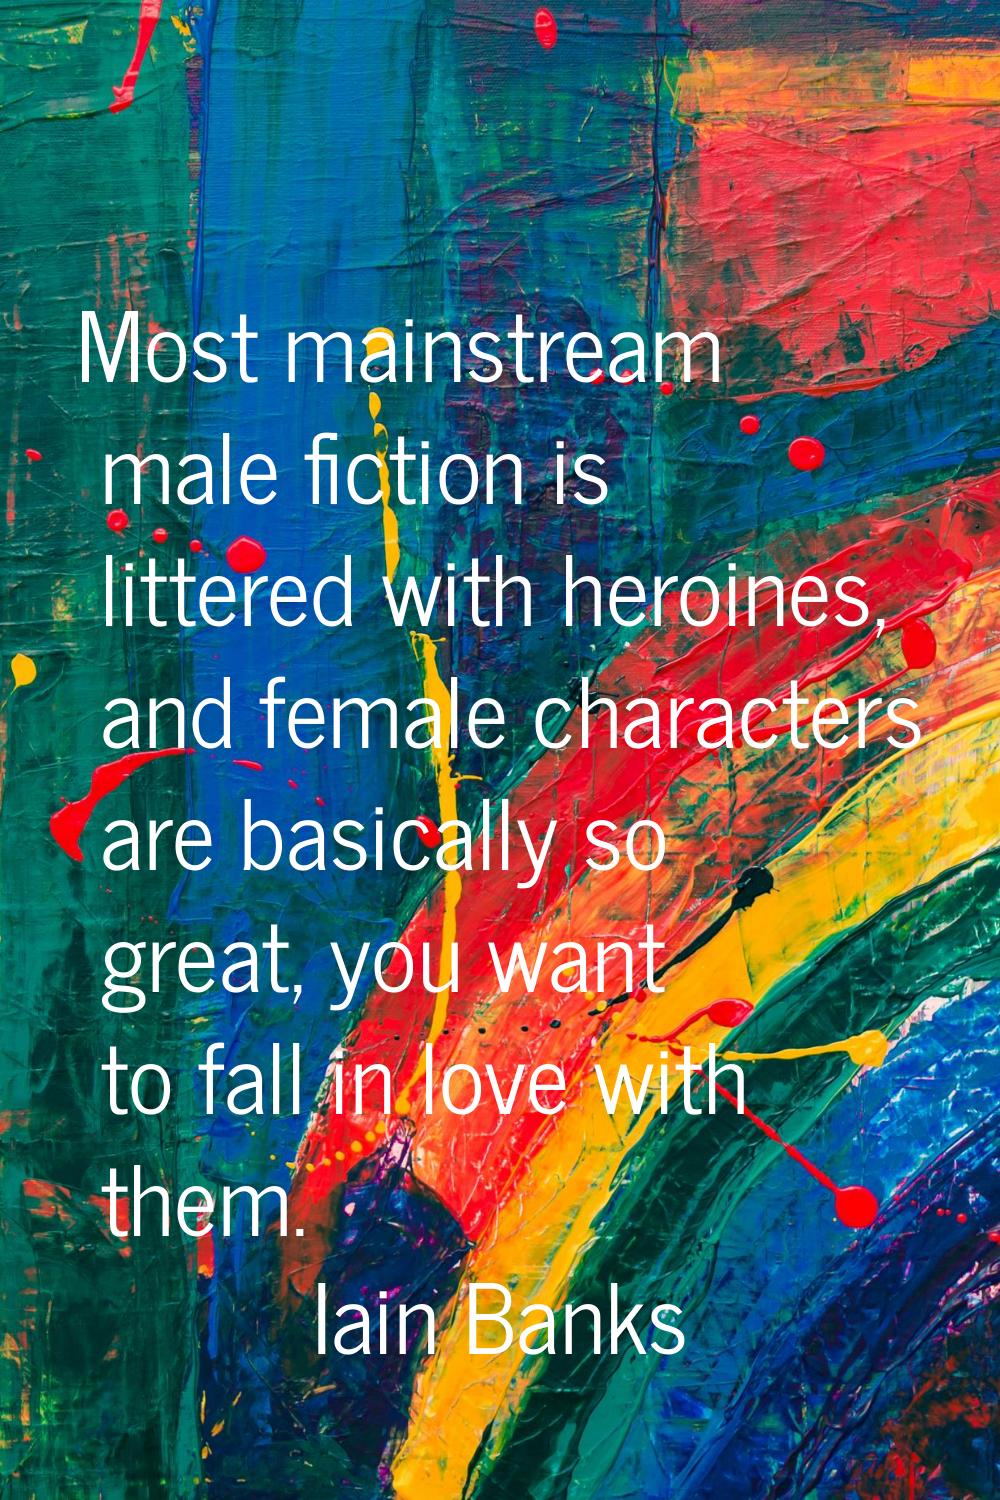 Most mainstream male fiction is littered with heroines, and female characters are basically so grea